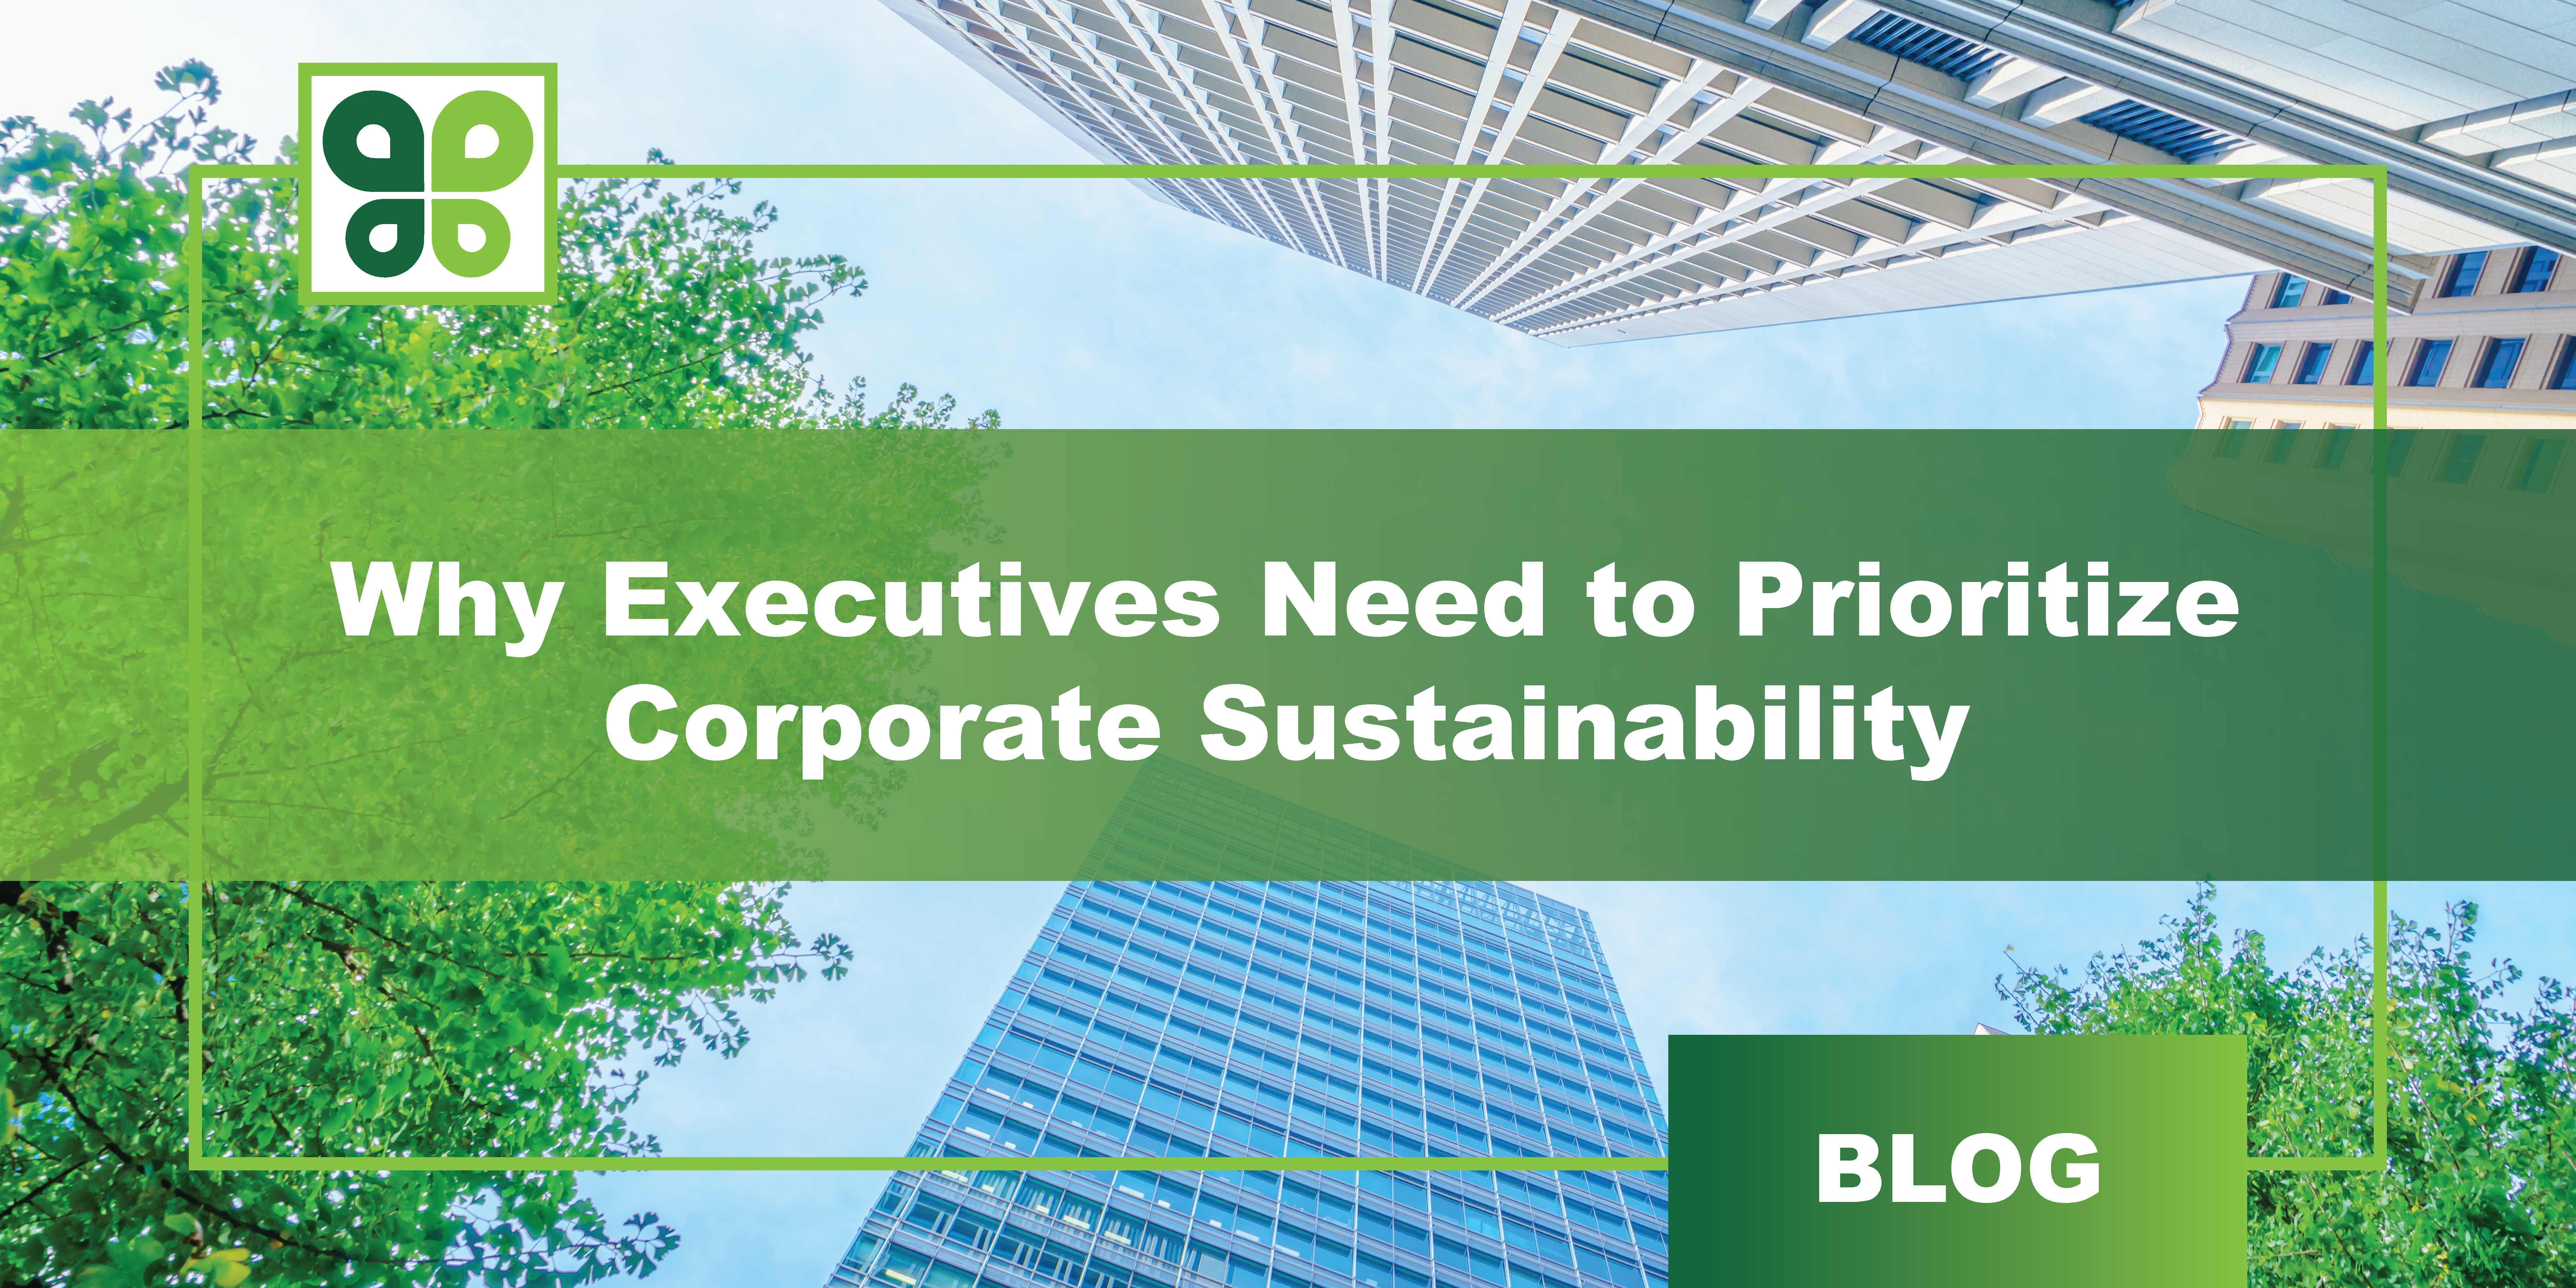 Why Executives Need to Prioritize Corporate Sustainability